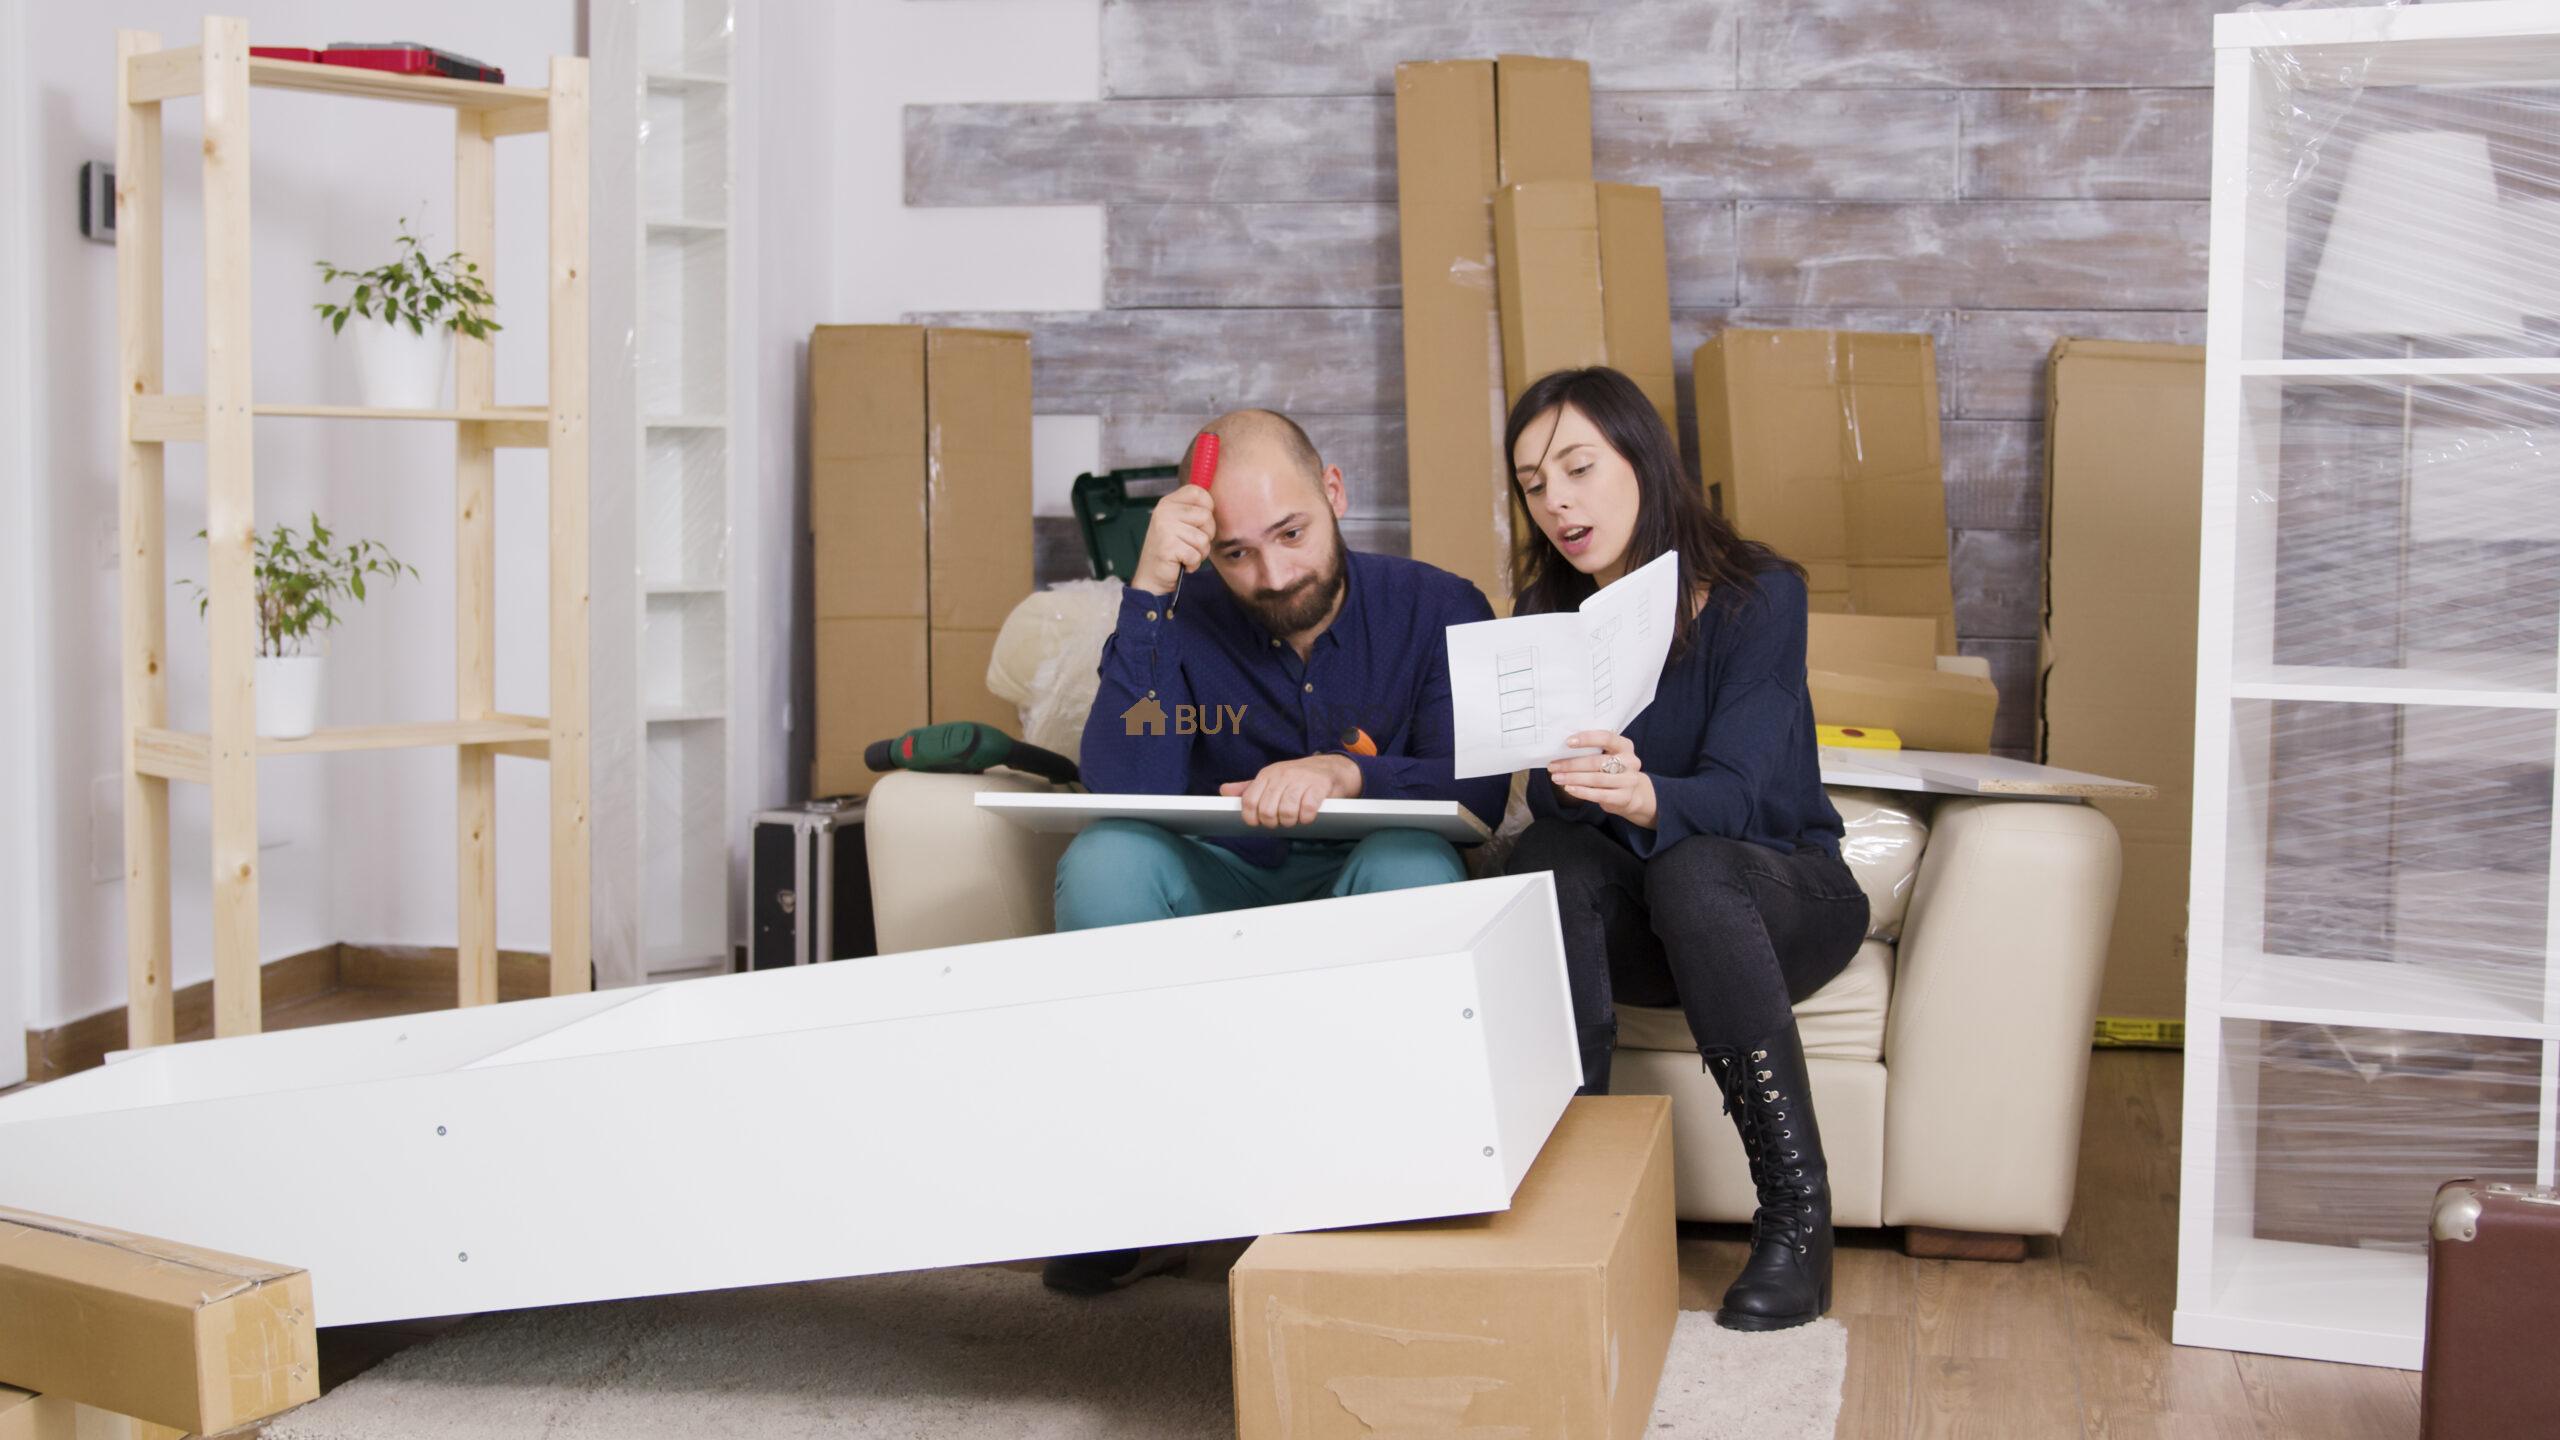 Furniture allowance is it common for renting